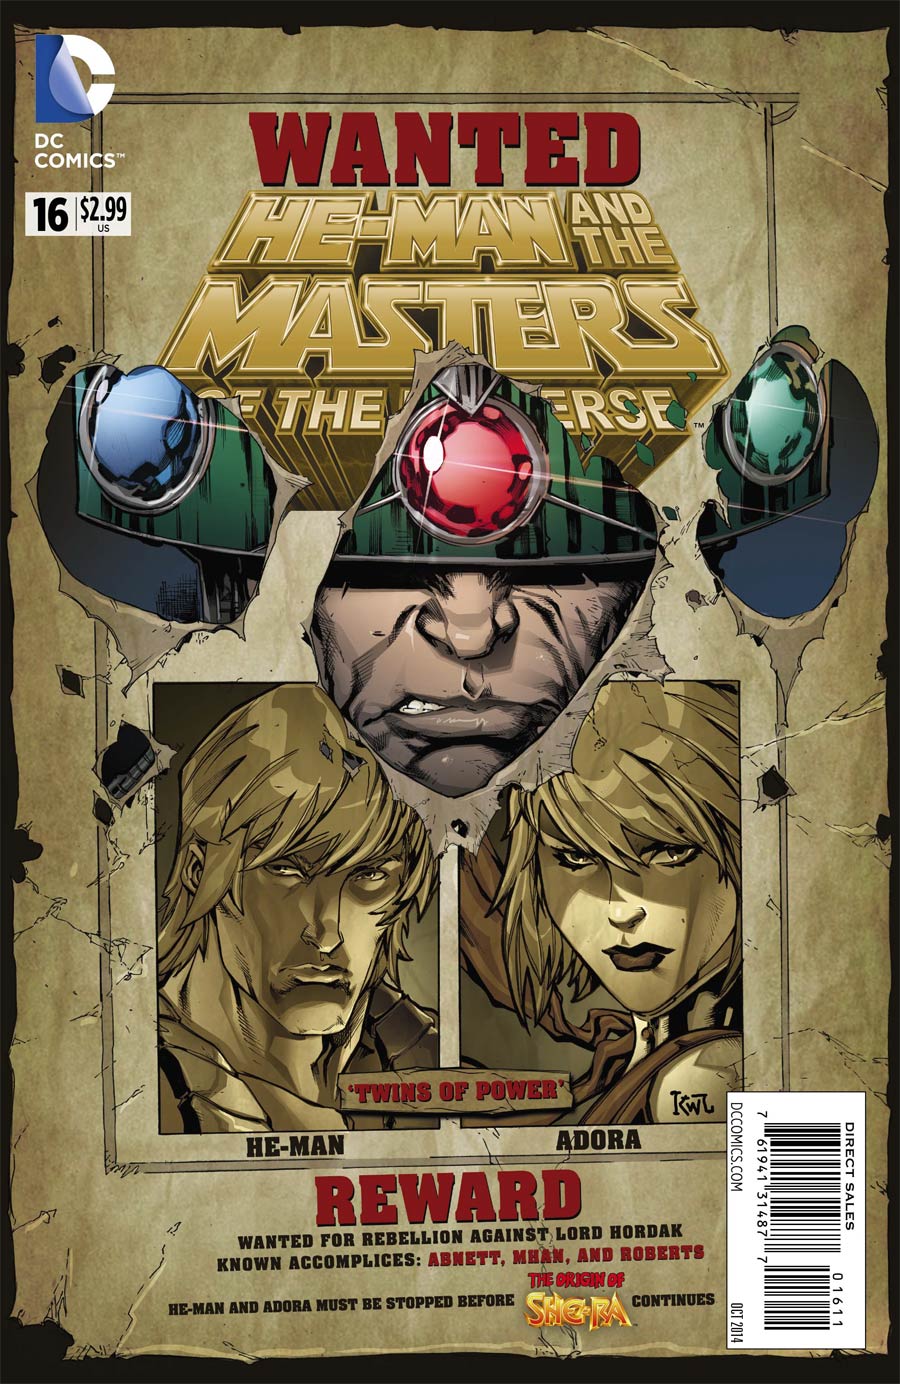 He-Man And The Masters Of The Universe Vol 2 #16